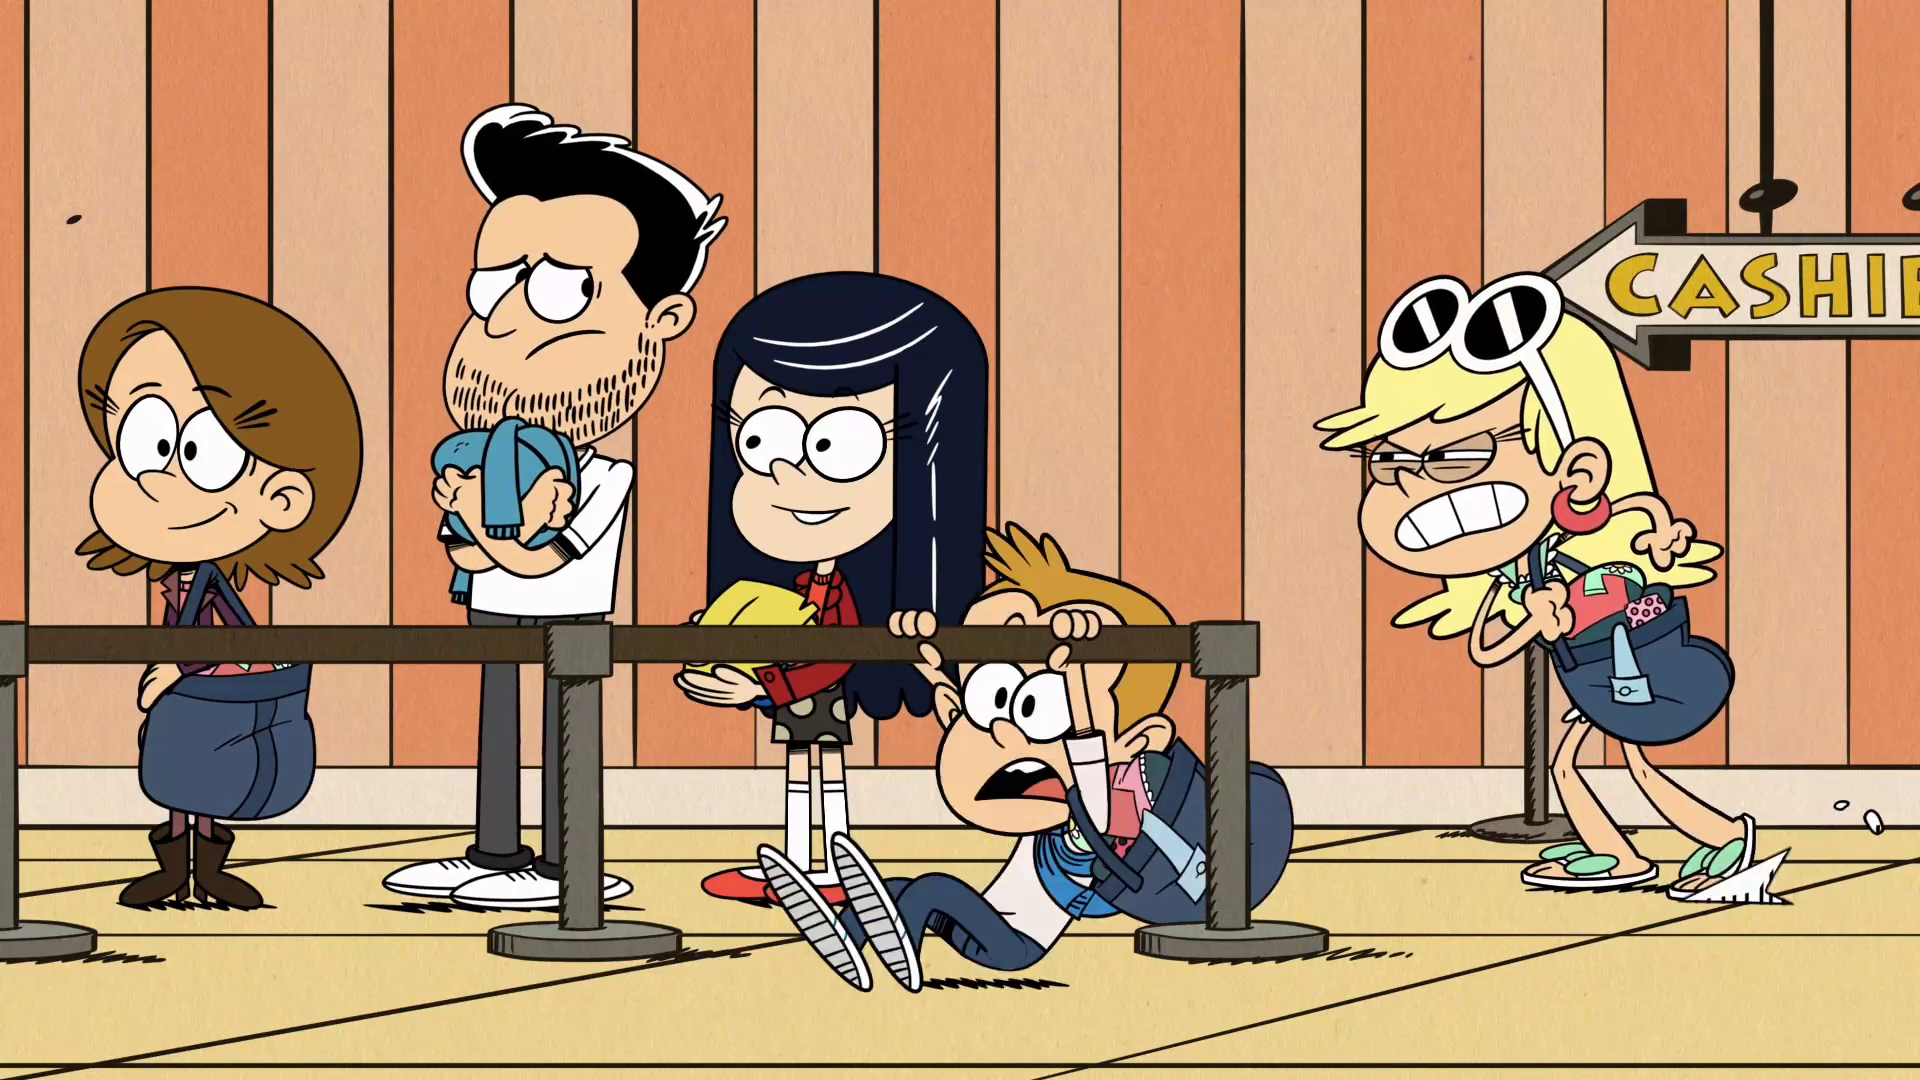 https://vignette.wikia.nocookie.net/theloudhouse/images/7/7a/S3E11B_Leni_is_About_to_Charge.png/revision/latest?cb=20181207173434